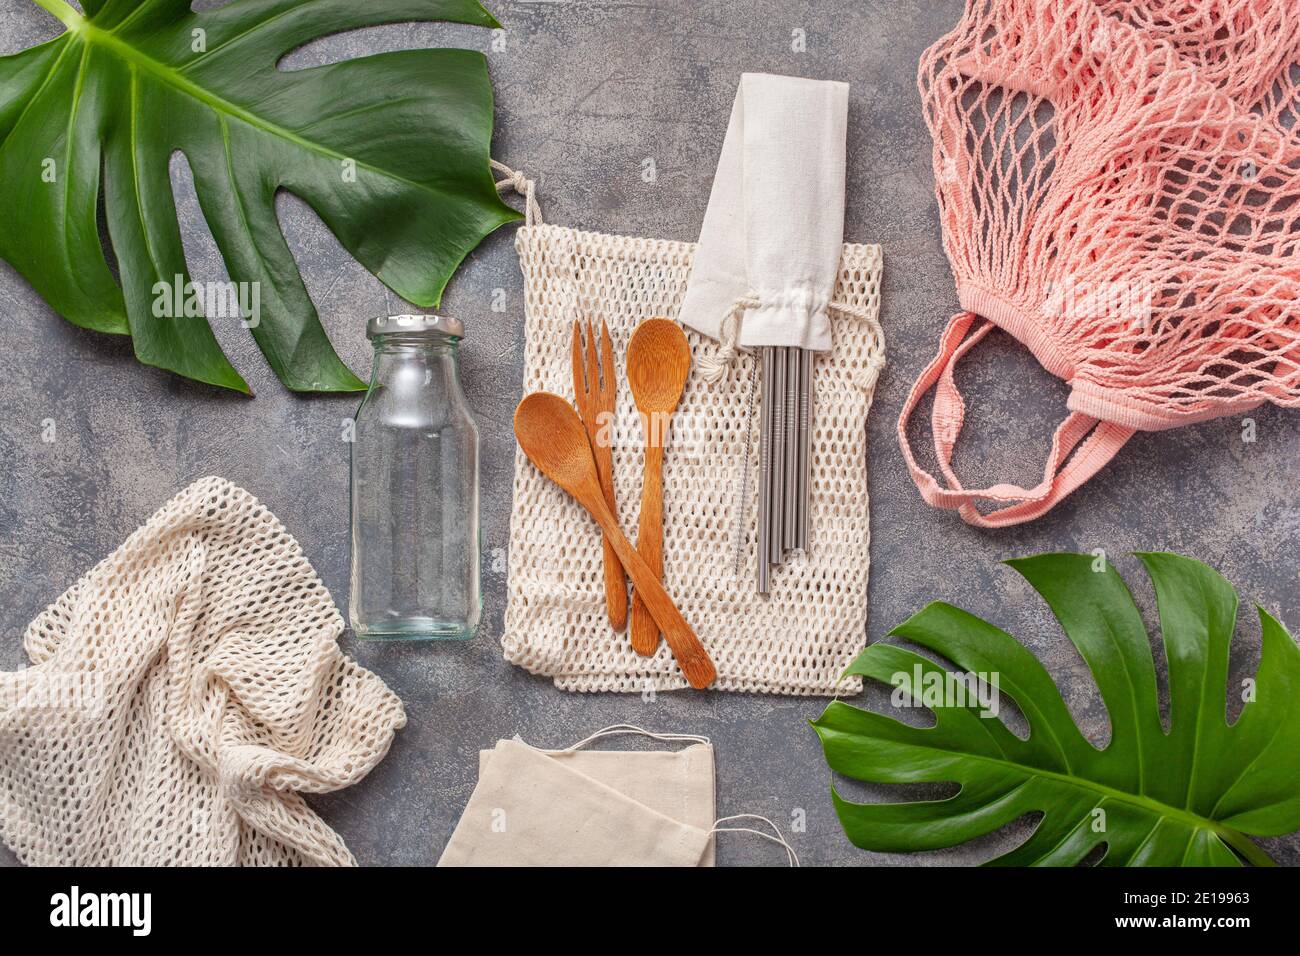 zero waste eco friendly concept. reusable cotton bag, stainless steel drinking staw, glass jar, wooden cutlery Stock Photo